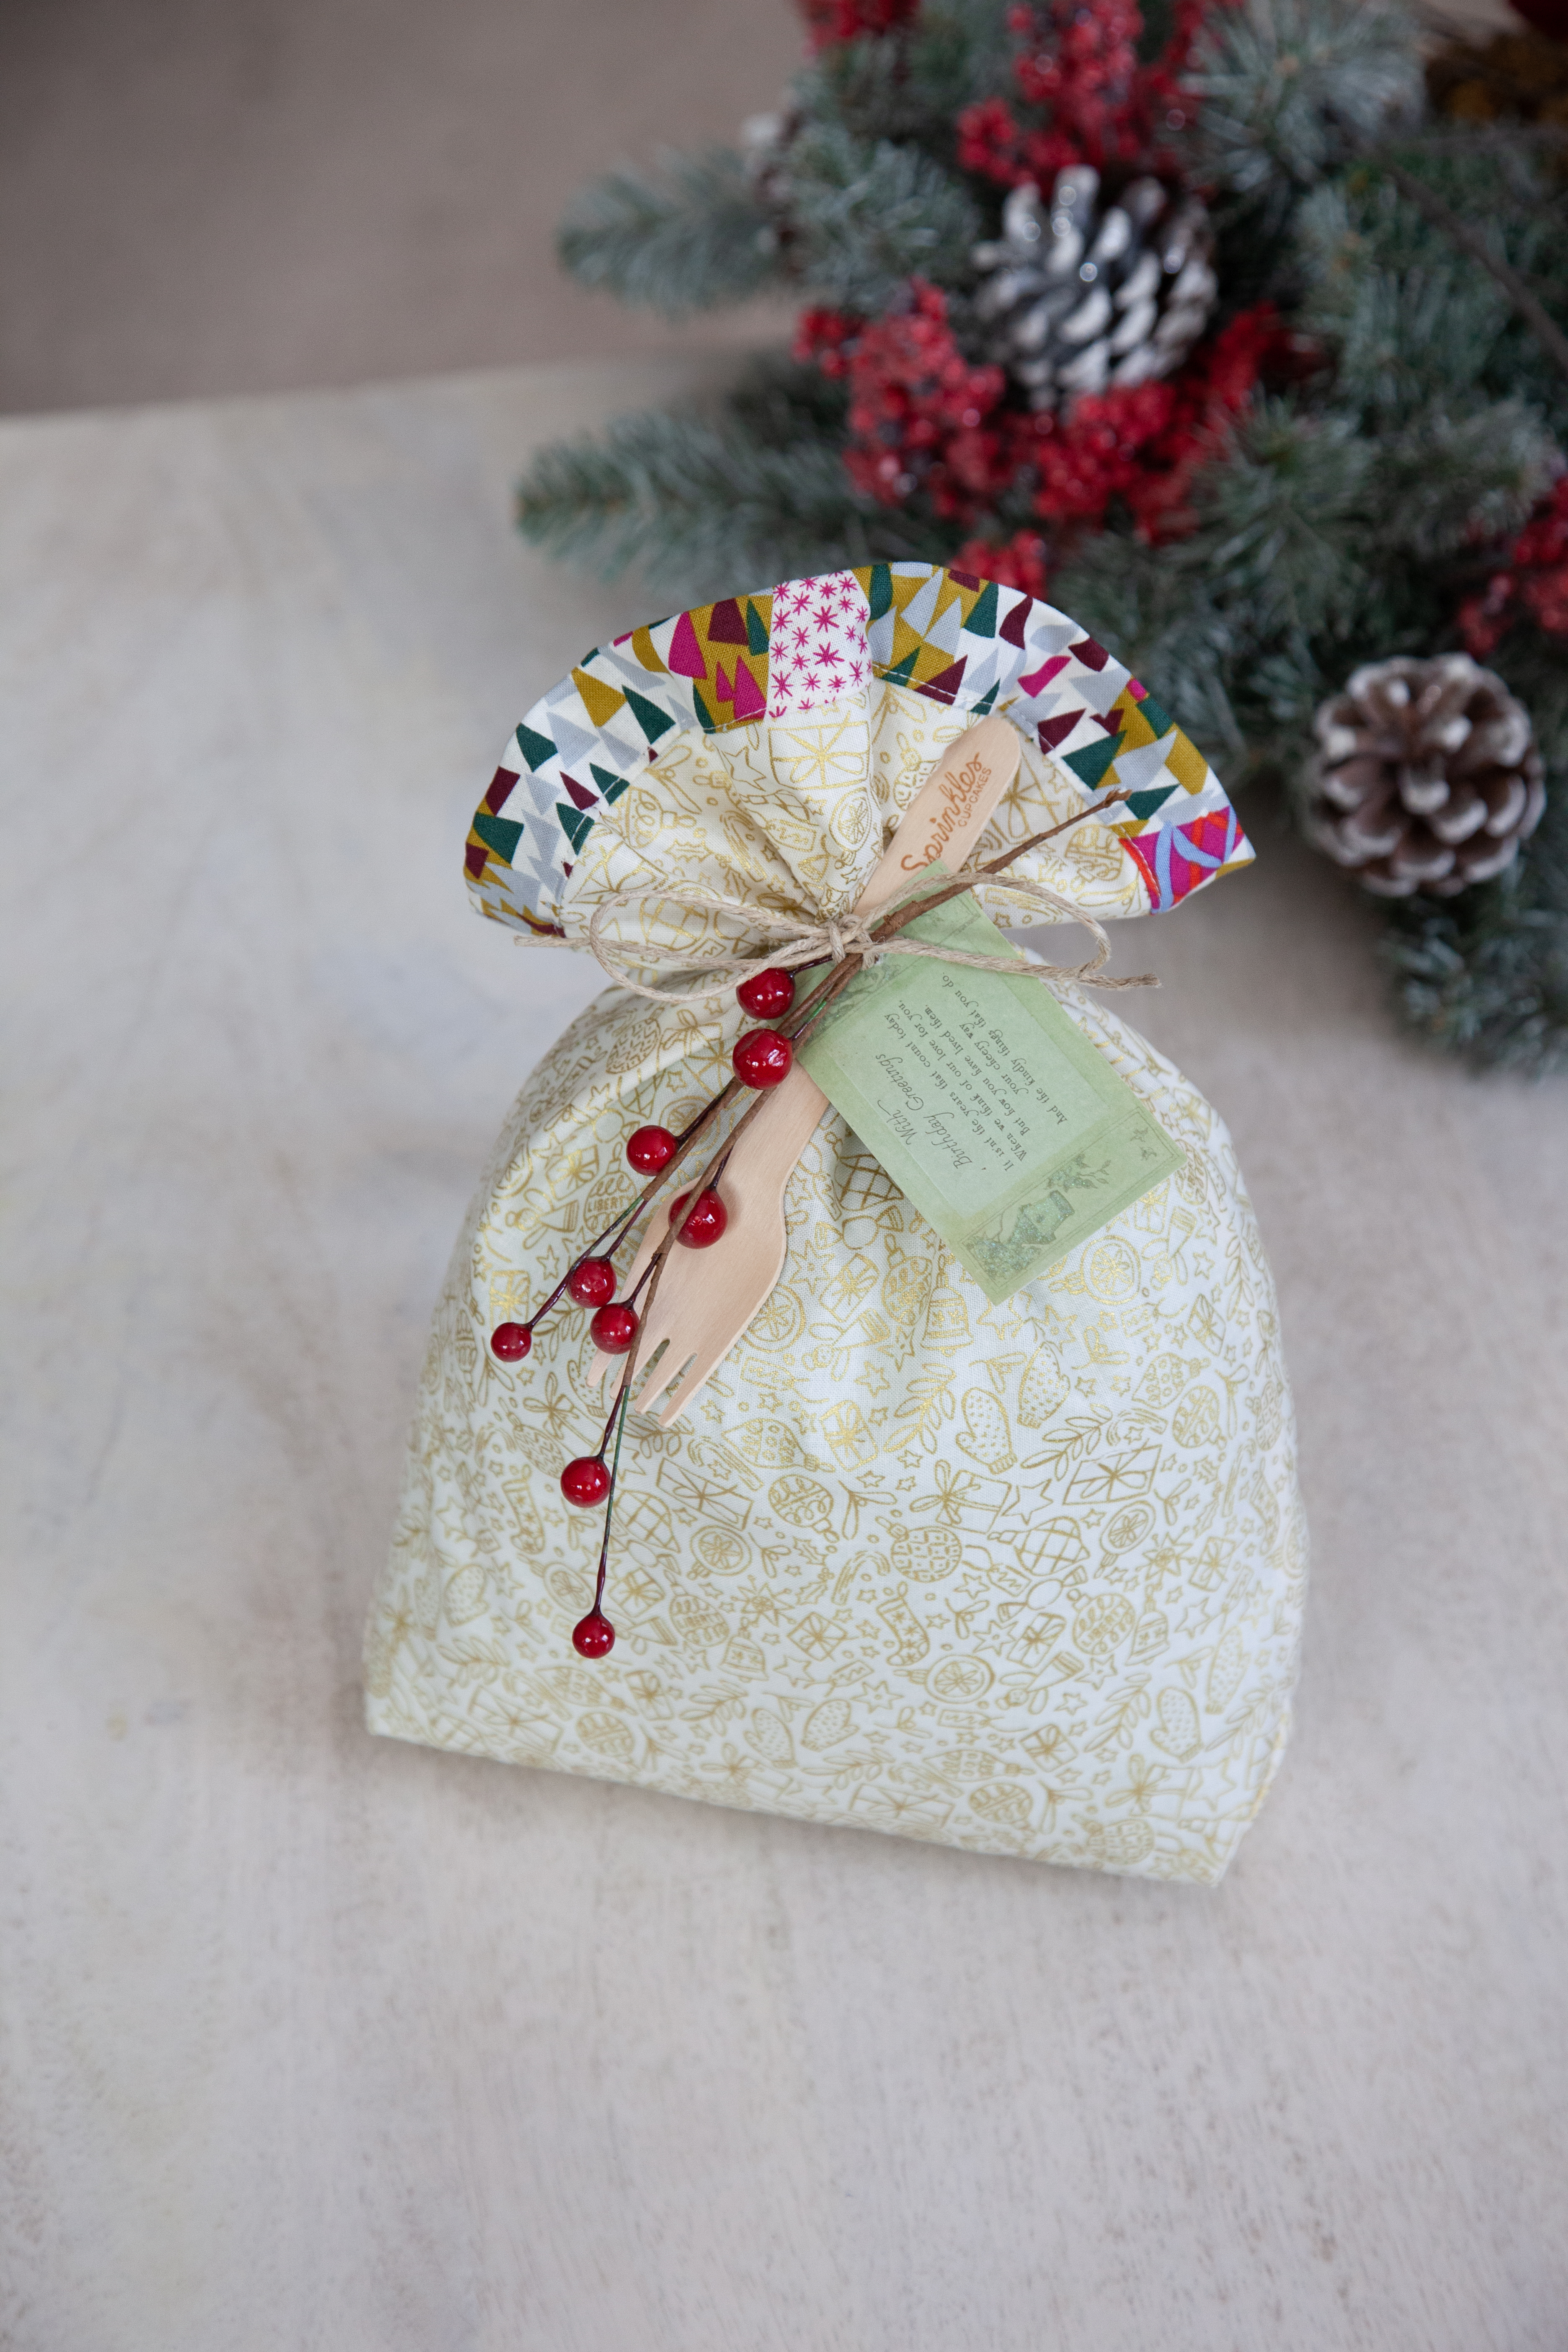 How to make holiday gift bags